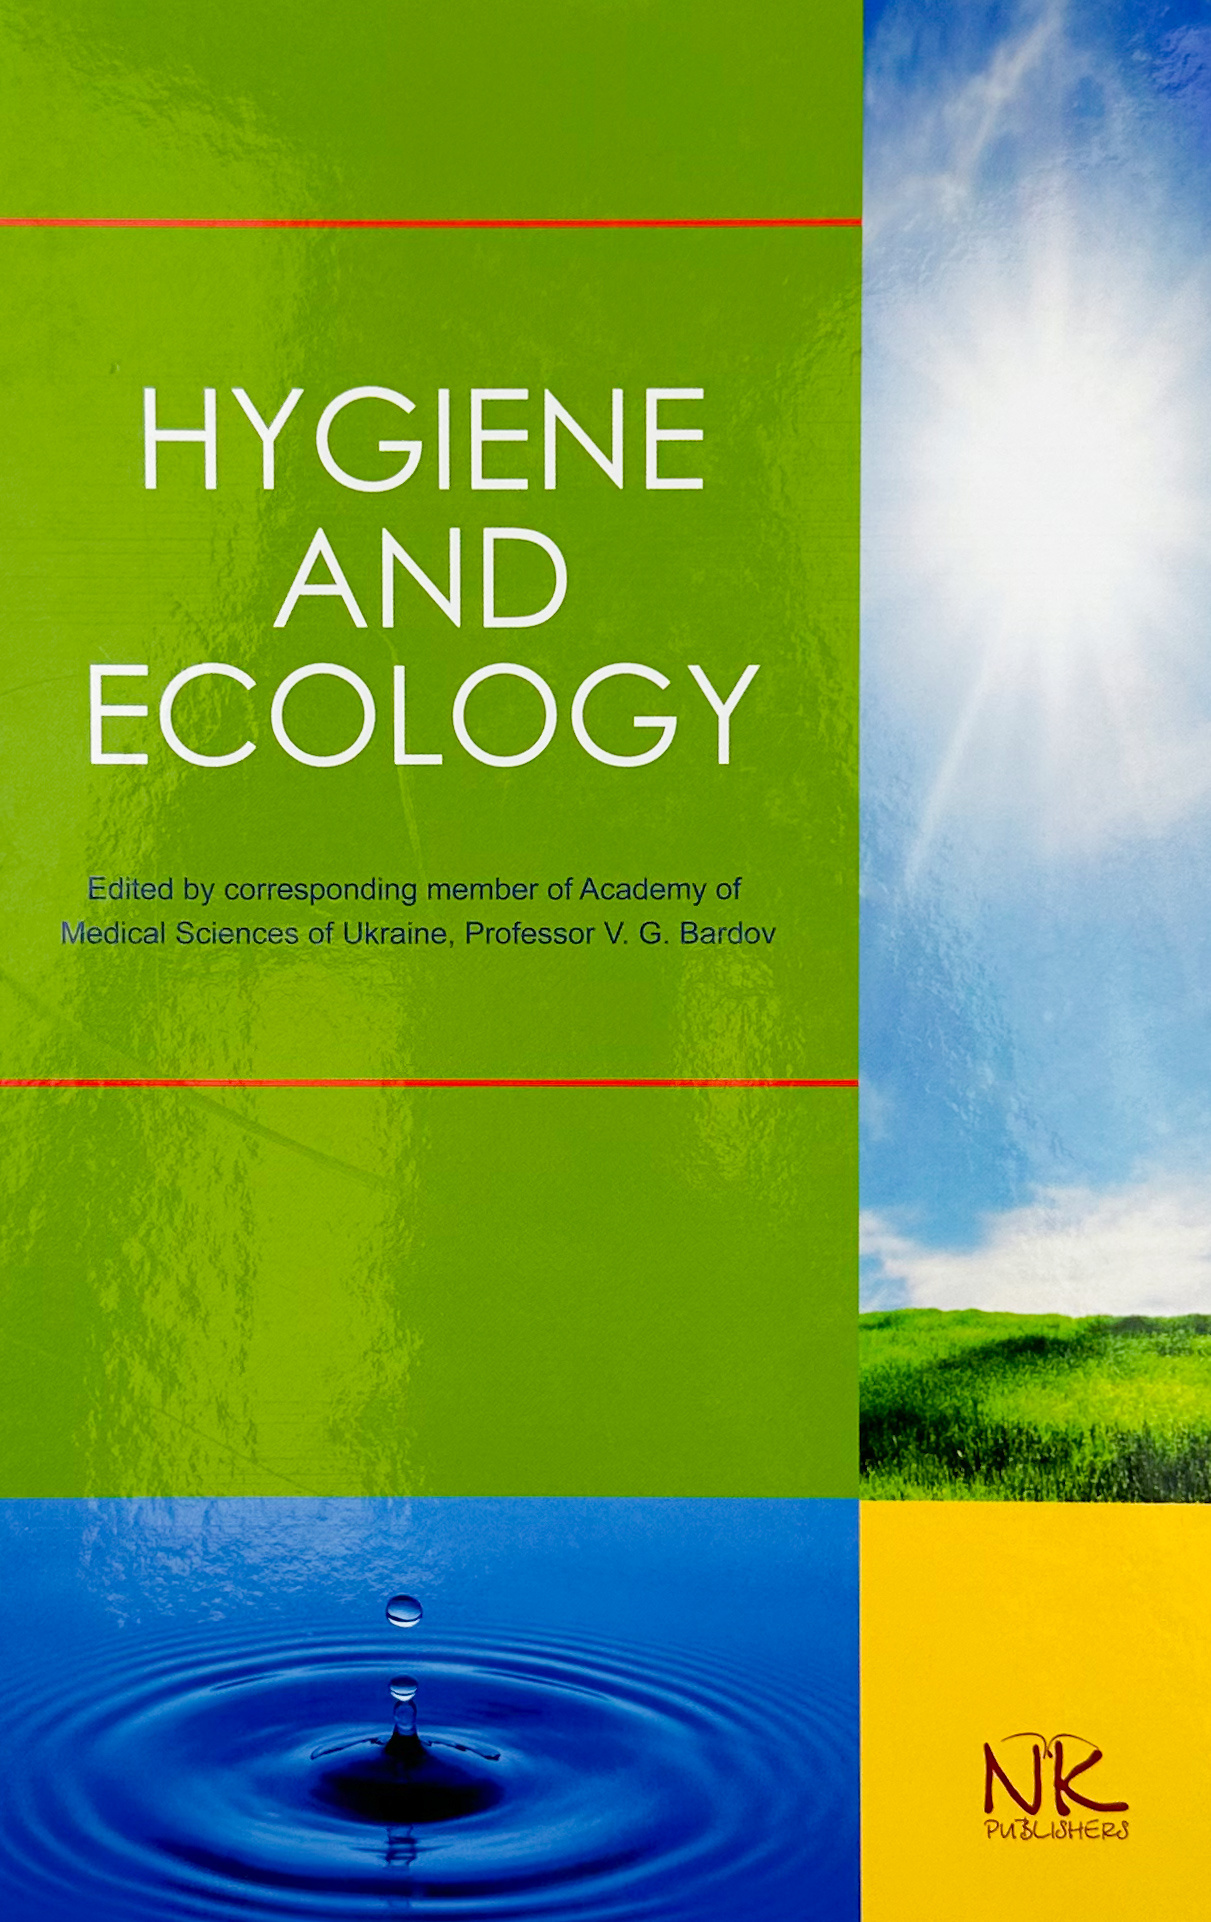 Hygiene and Ecology